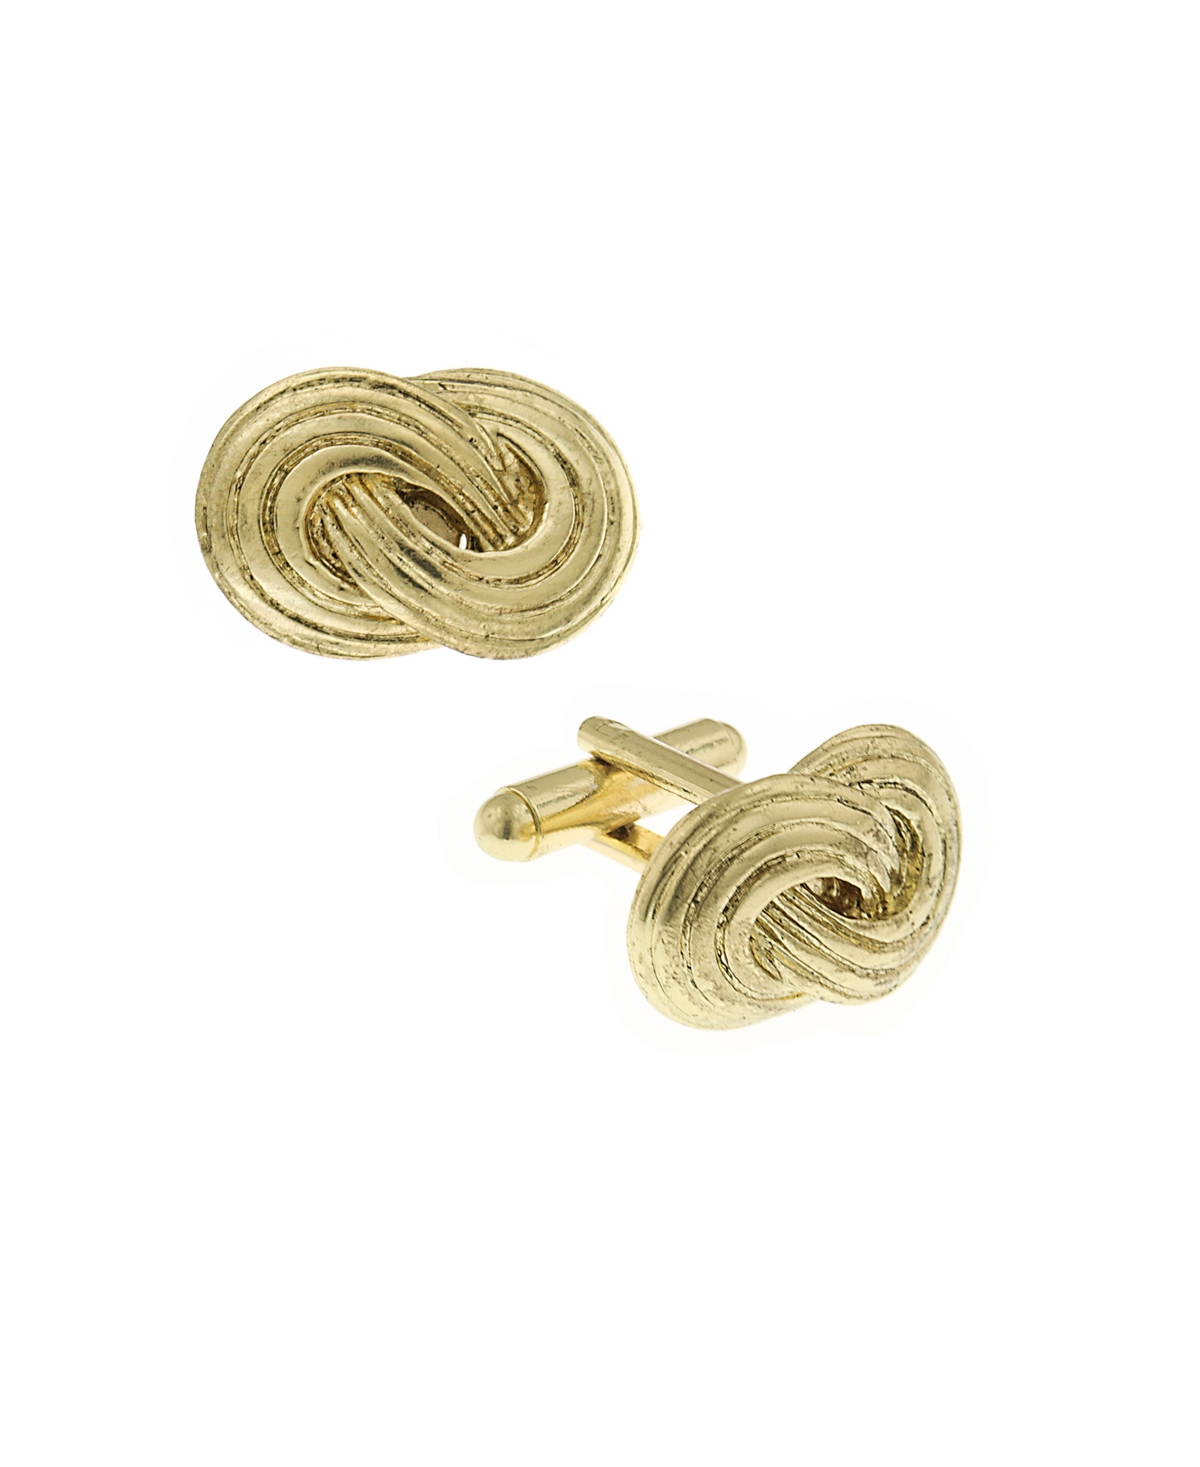 Jewelry 14K Gold-Plated Infinity Knot Cufflinks - Gold